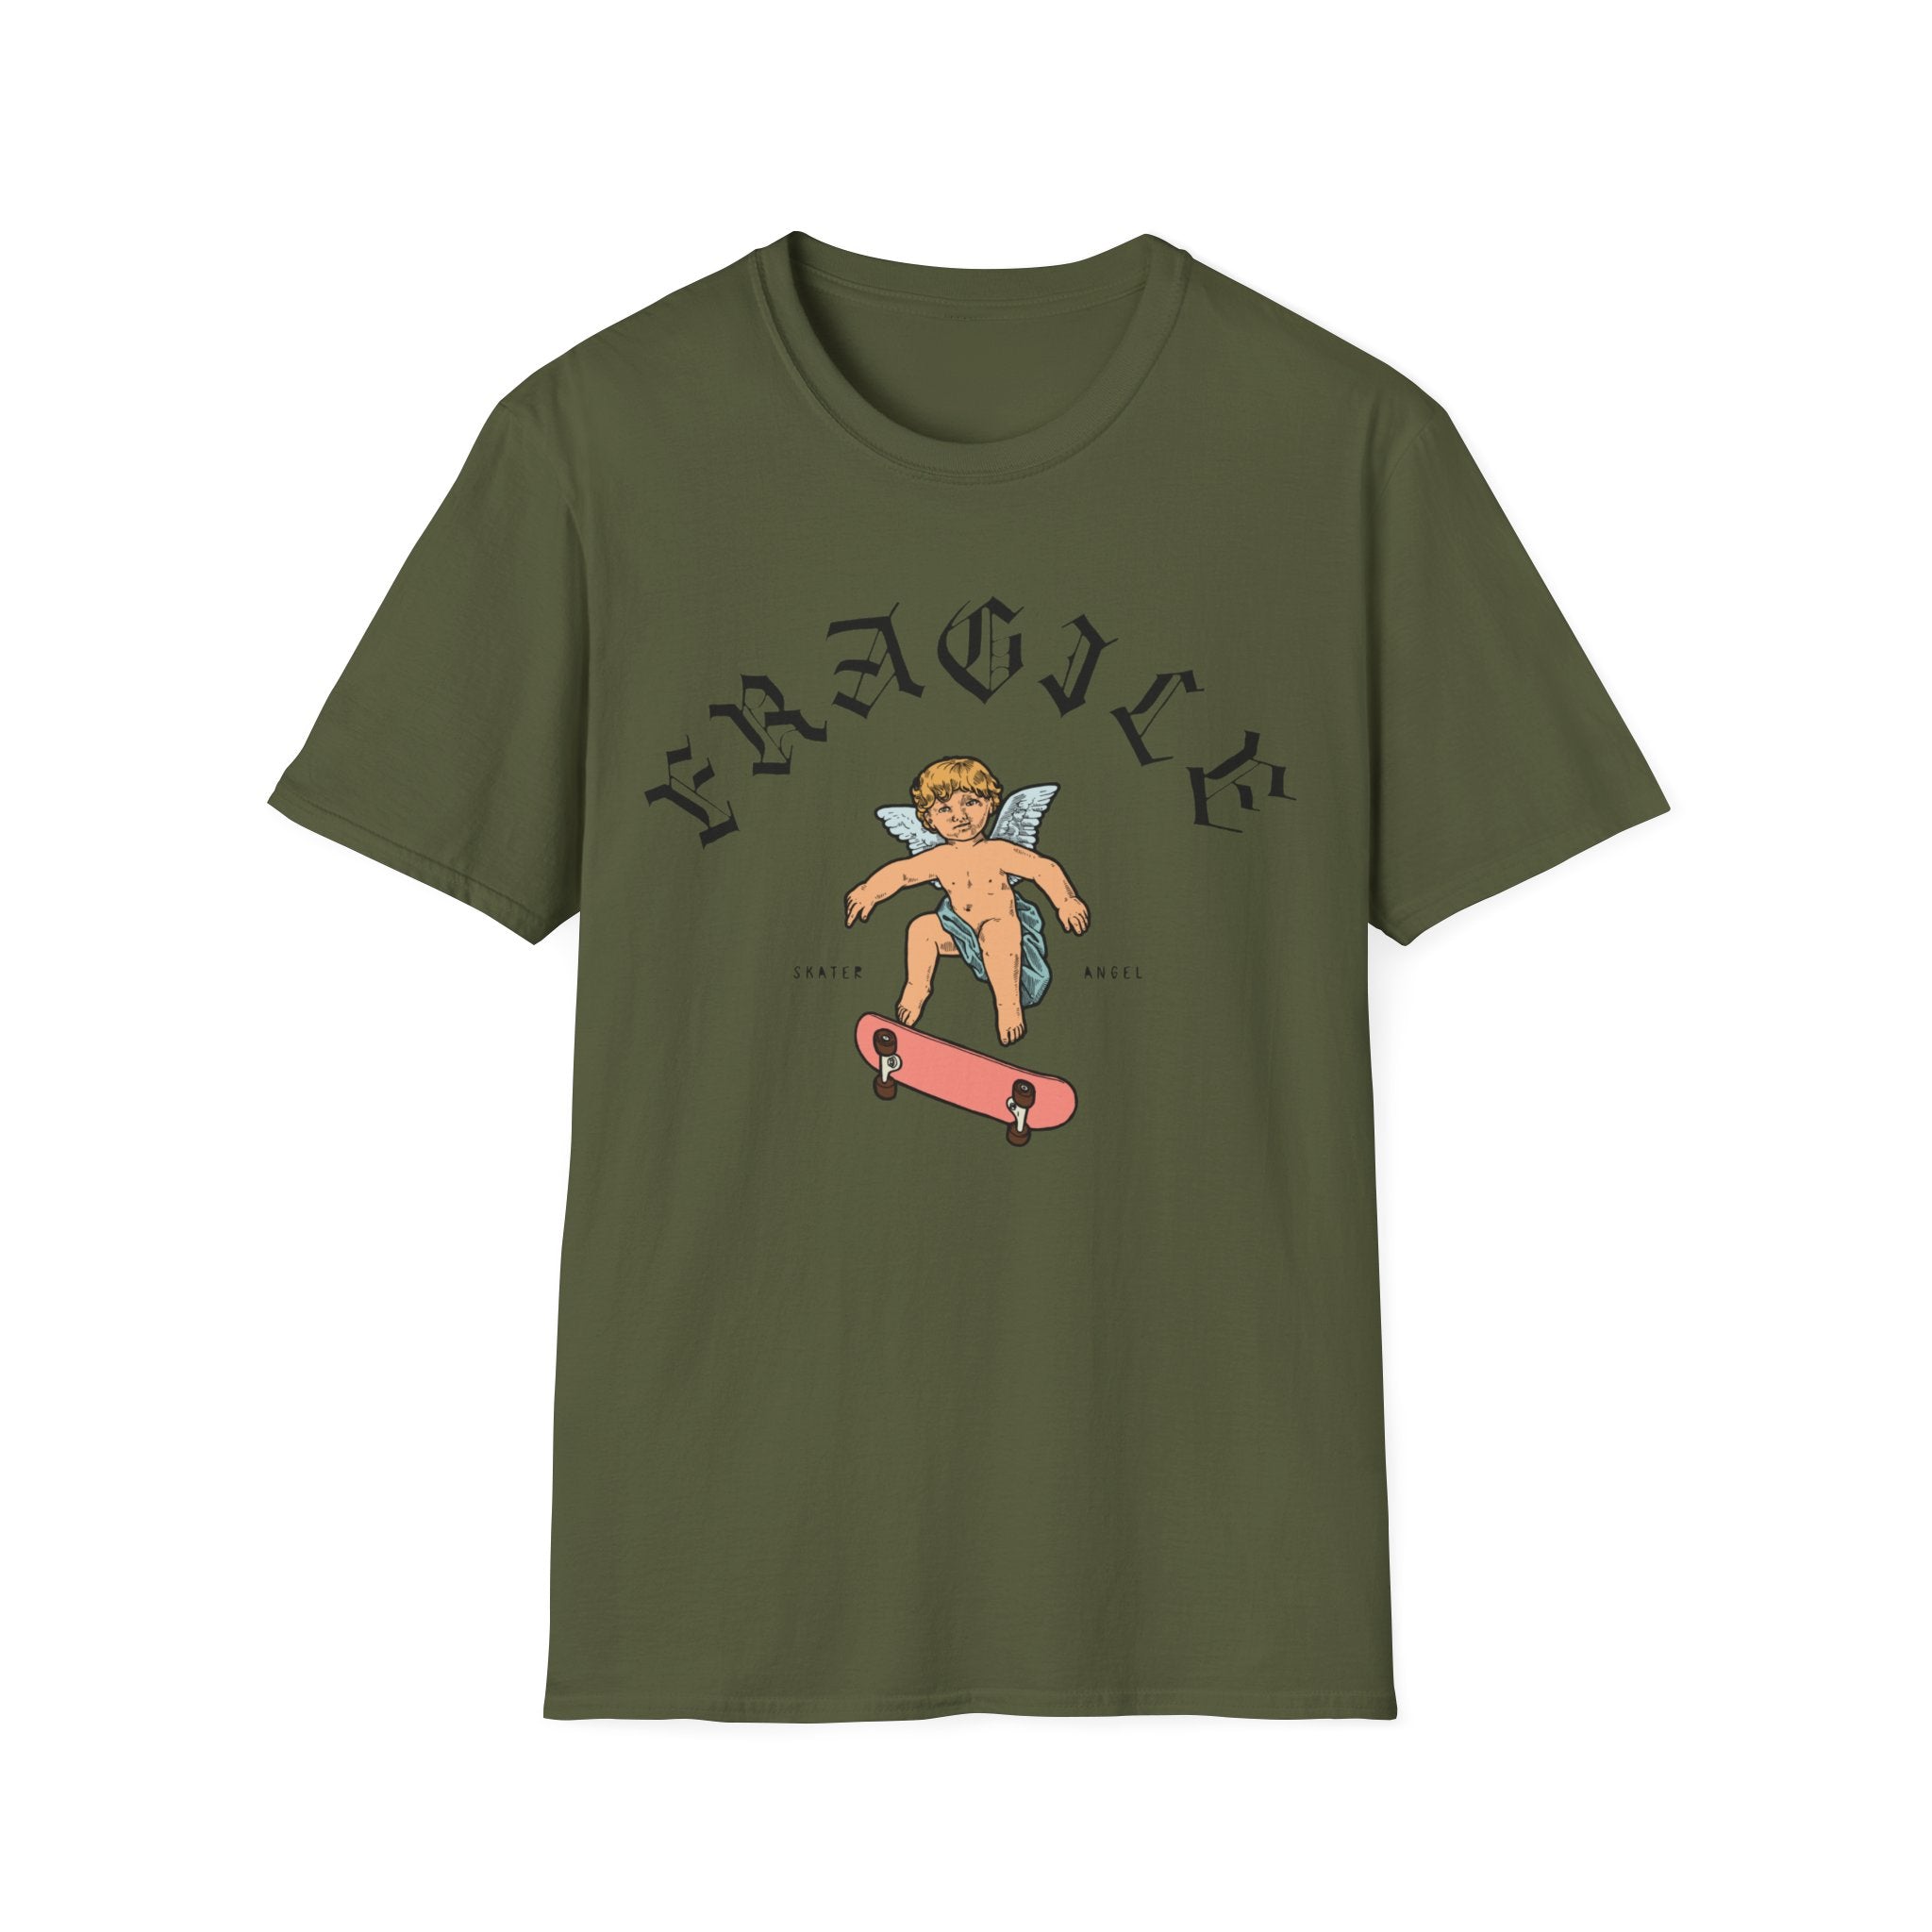 Get ready to skate in style with this soft and comfortable Skater Angel t-shirt! Featuring a relaxed fit, this t-shirt showcases an awesome image of a girl riding a skateboard. Get your hands on this must-have Skater Angel shirt today!